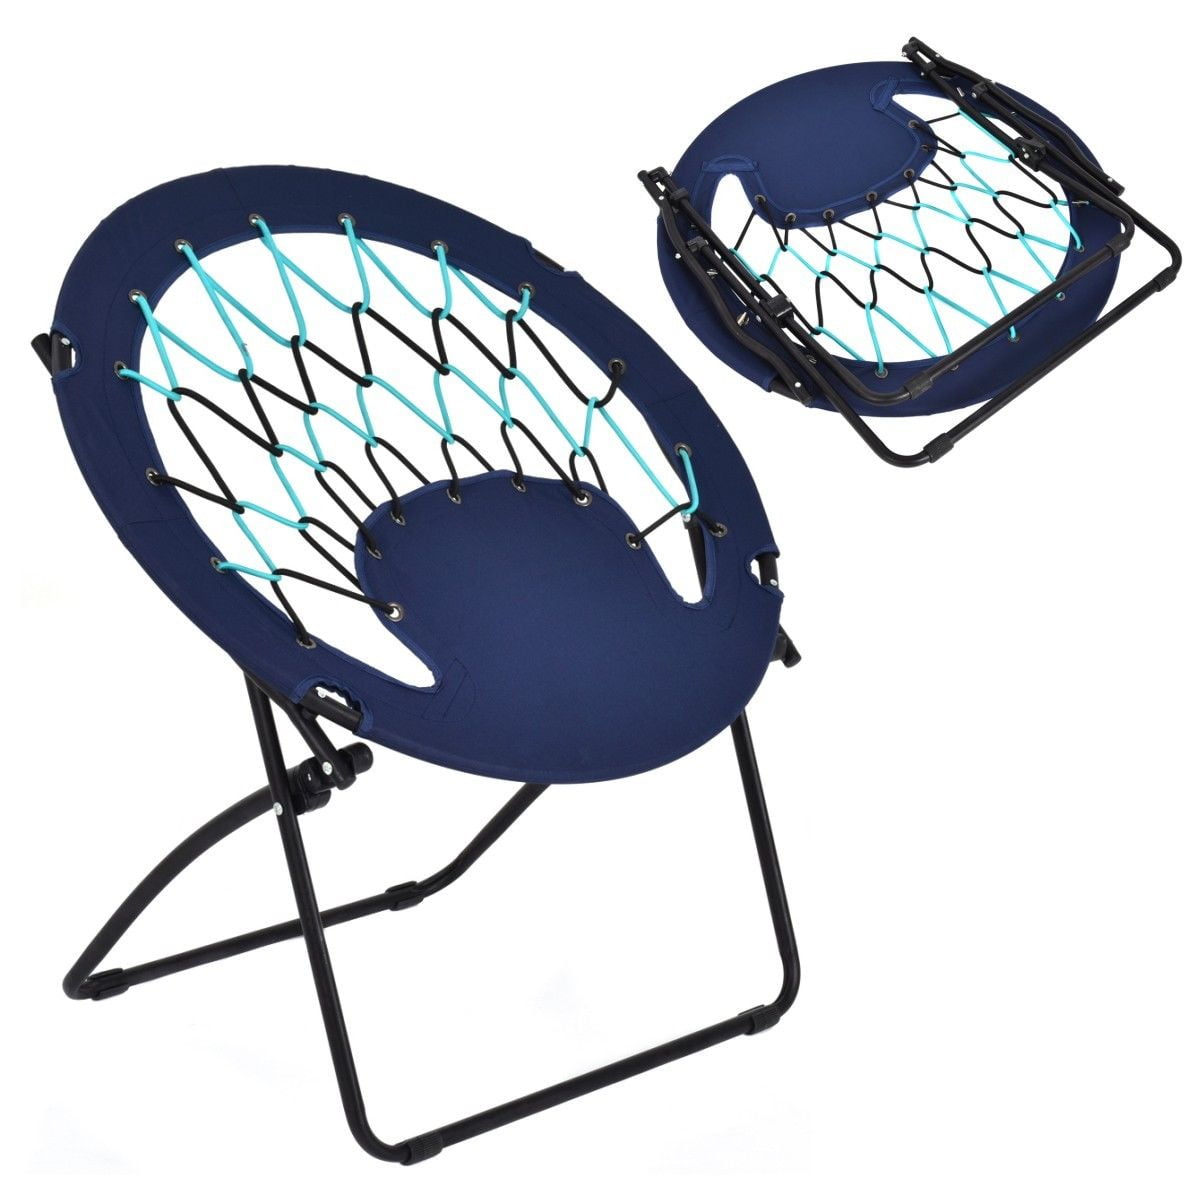 Folding Home Garden Round Patio Bungee Chair Steel Frame Outdoor Camping Hiking